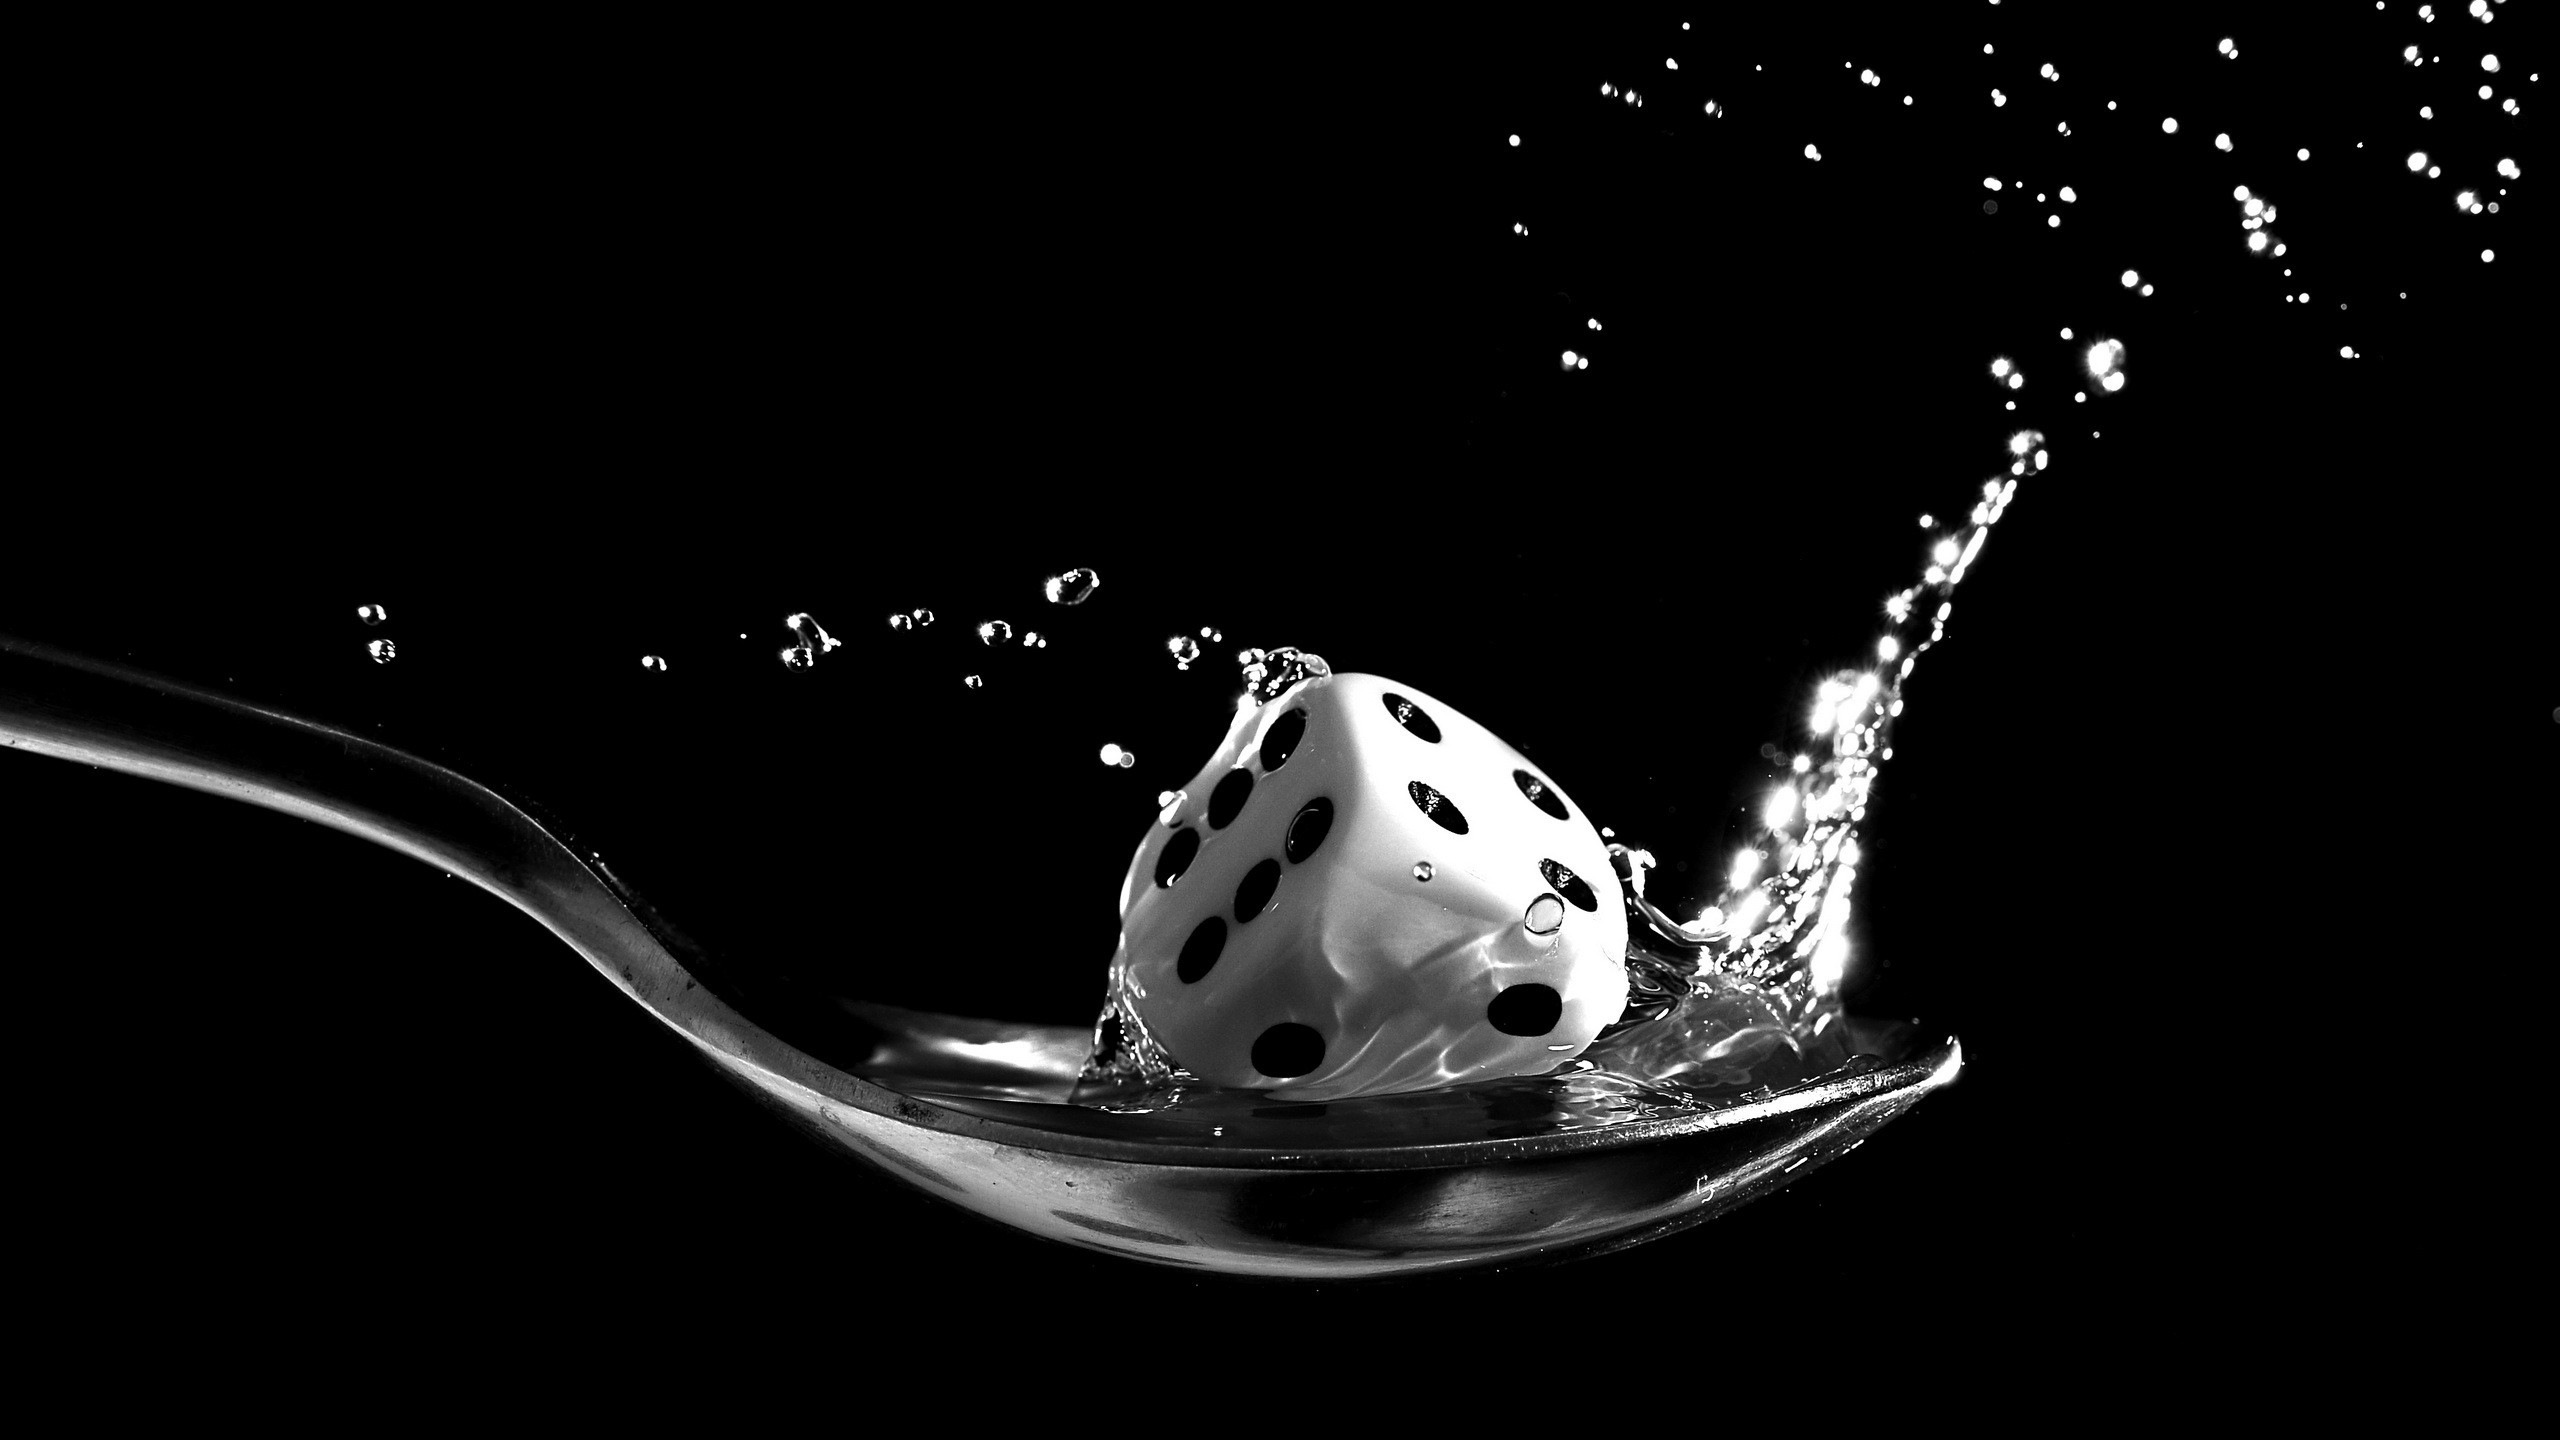 Spoons Dice Cube Dots Splashes Water Water Drops Black Background Closeup Monochrome 2560x1440